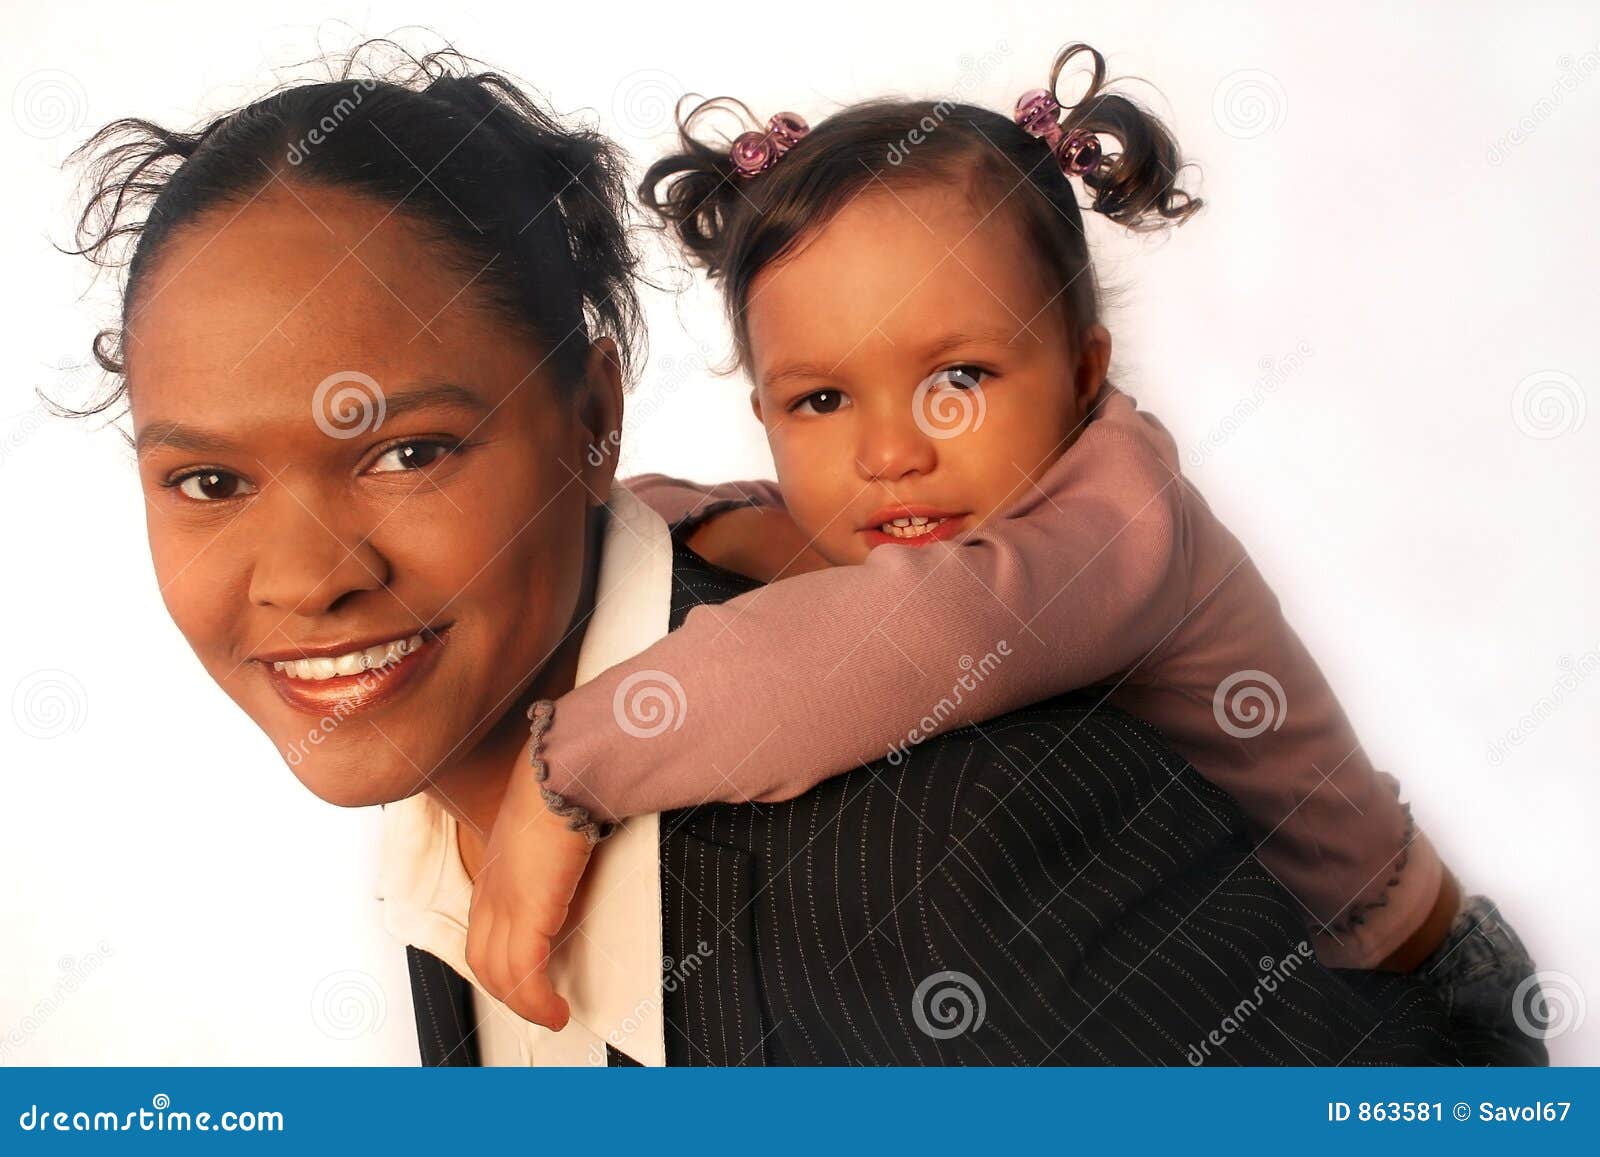 working families - mother and daughter